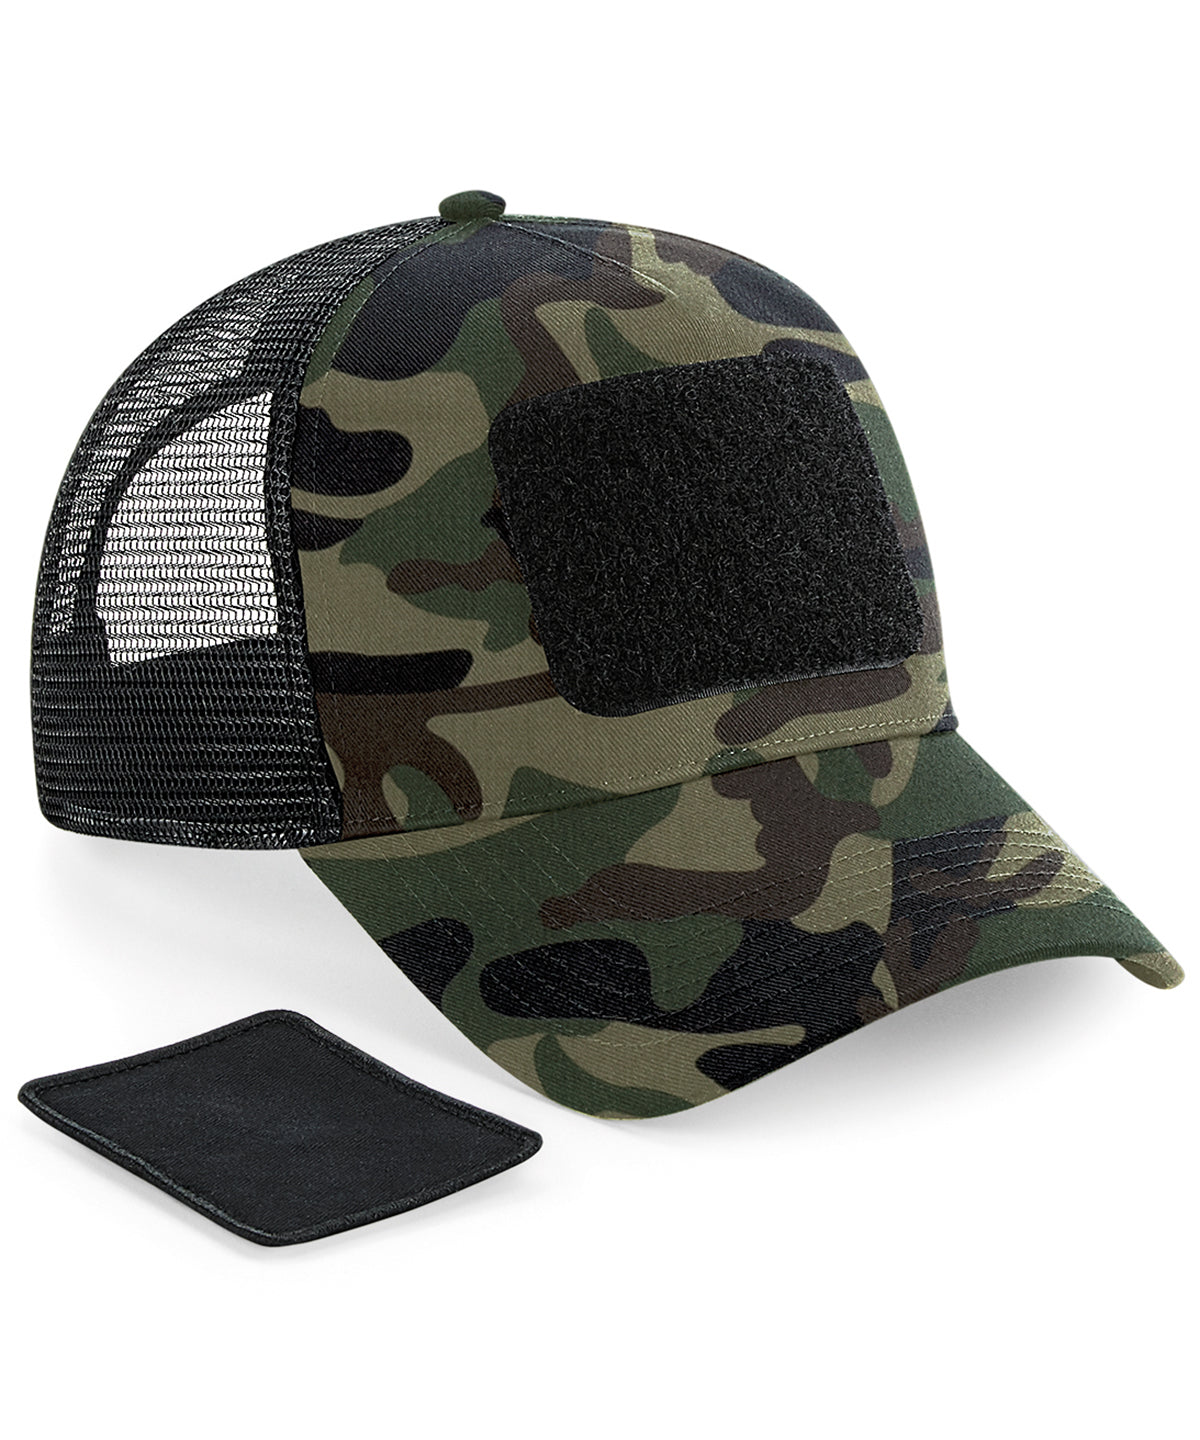 Personalised Caps - Camouflage Beechfield Patch snapback trucker